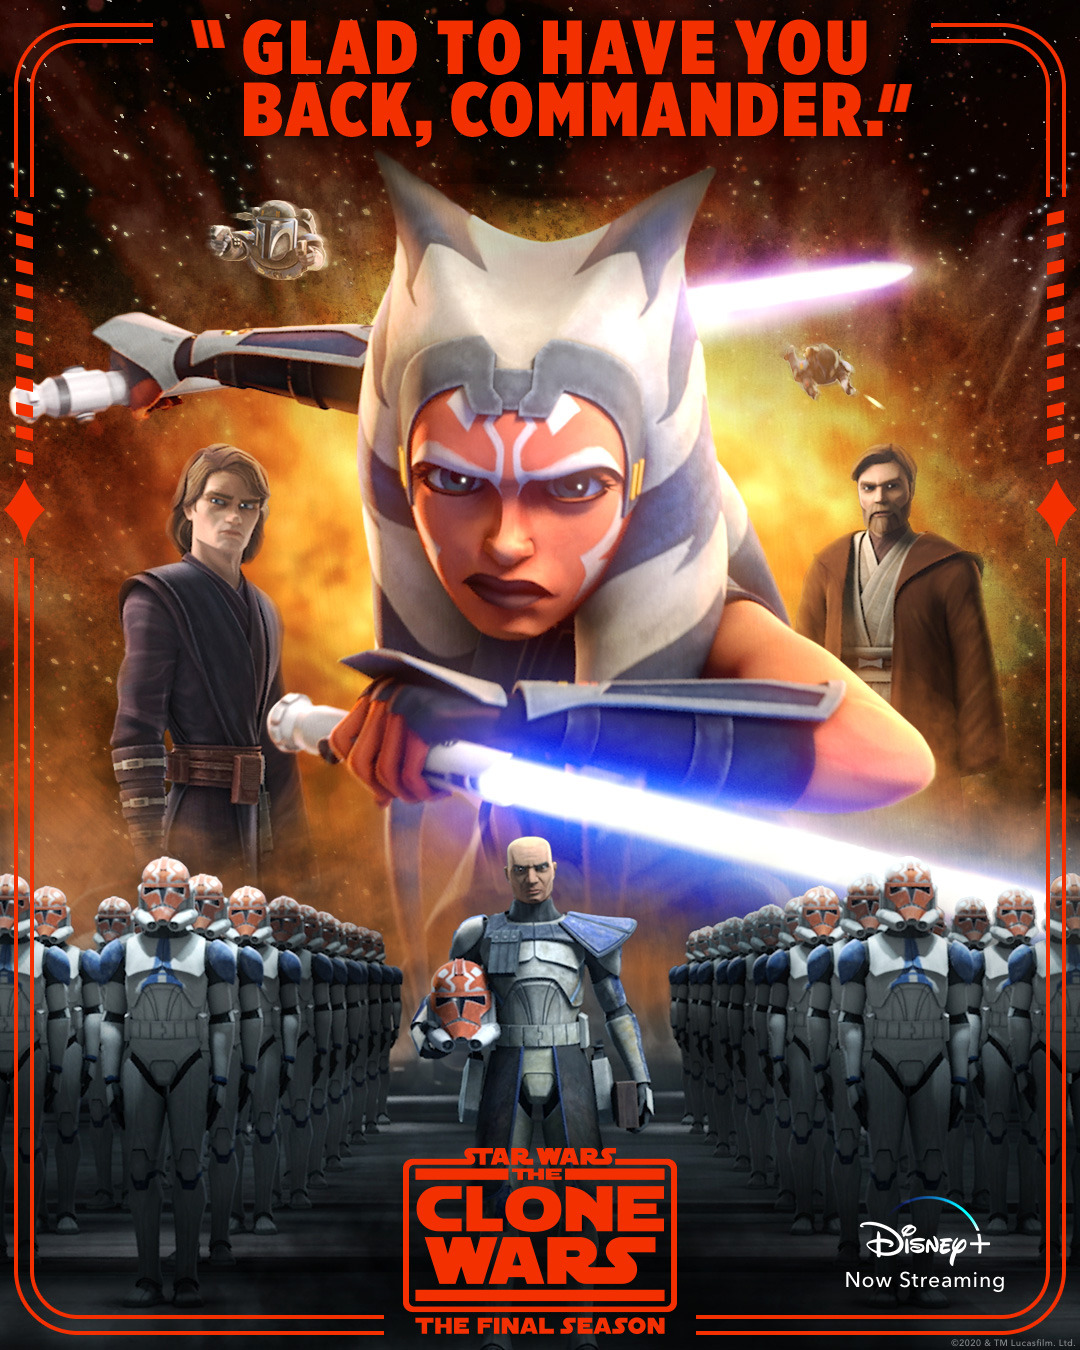 Extra Large TV Poster Image for Star Wars: The Clone Wars (#6 of 6)